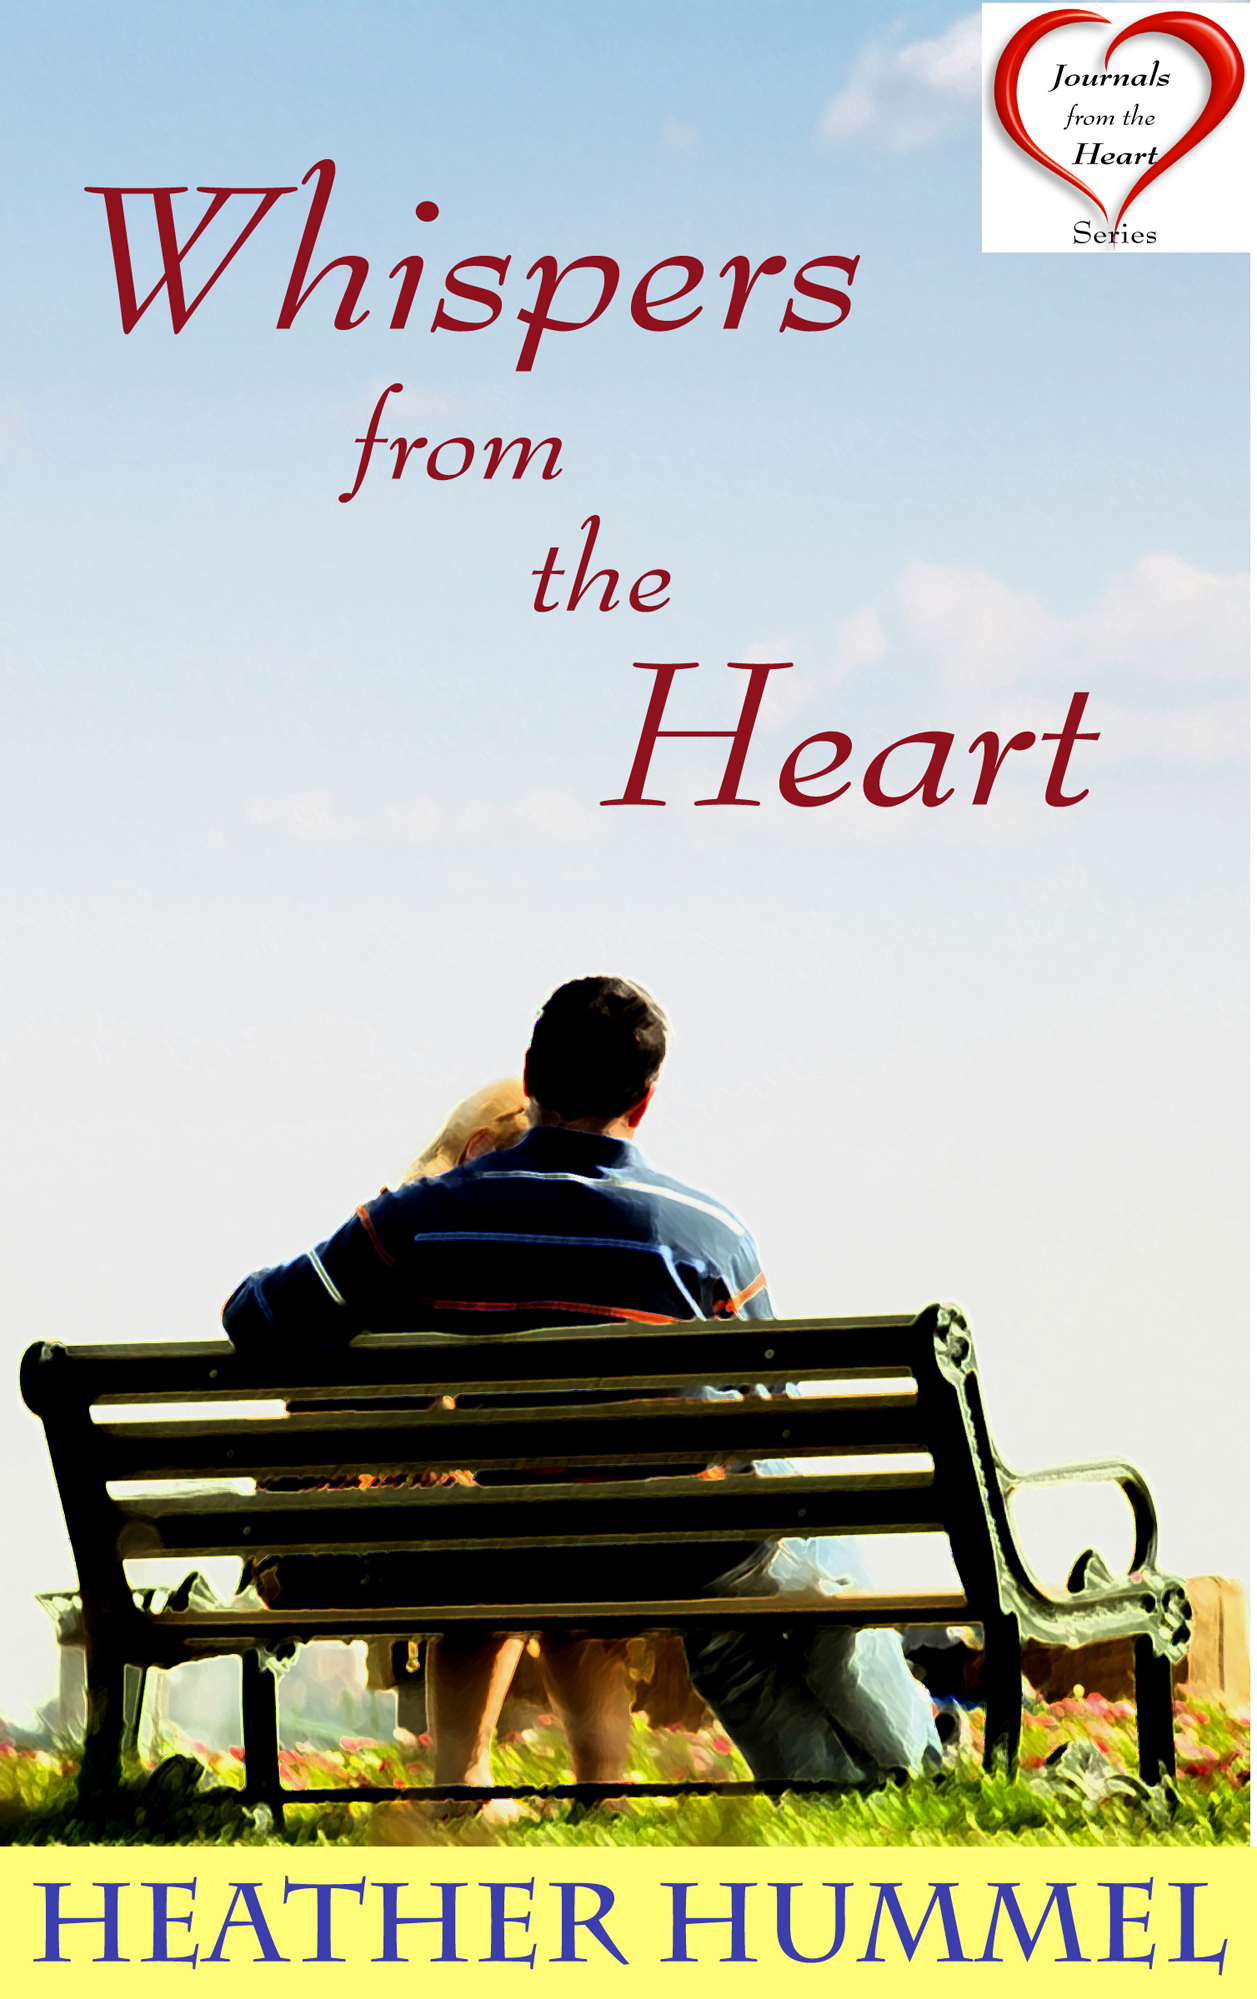 Whispers from the Heart (Journals from the Heart Series)